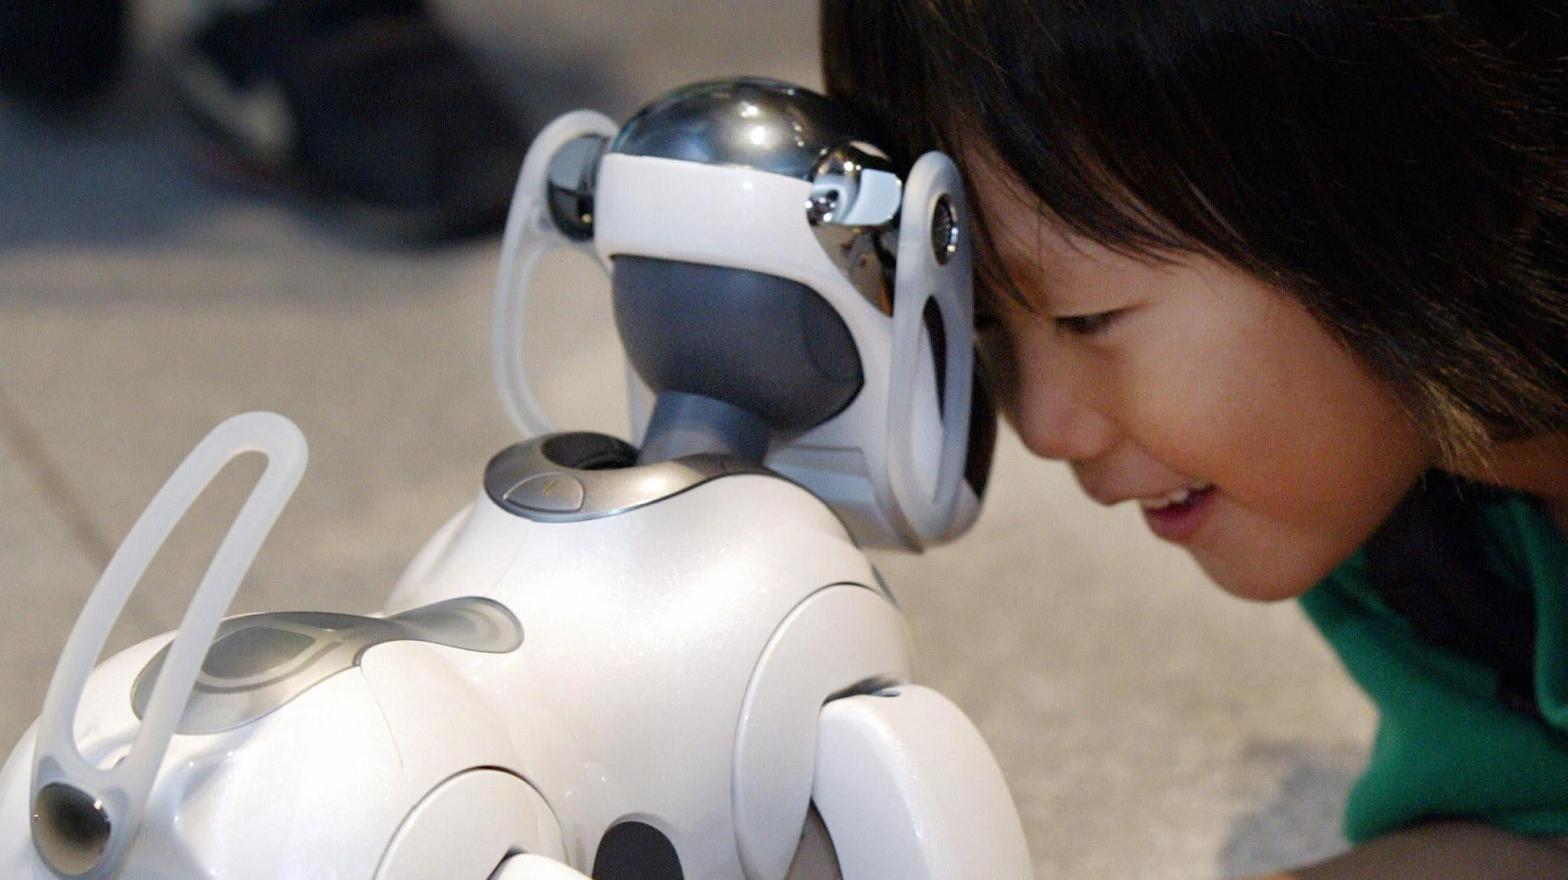 A boy playing with Sony's AIBO ERS-7 during AIBO's 5th anniversary exhibition held in Tokyo, Japan on May 2004.  (Photo: Toshifumi Kitamura/AFP, Getty Images)